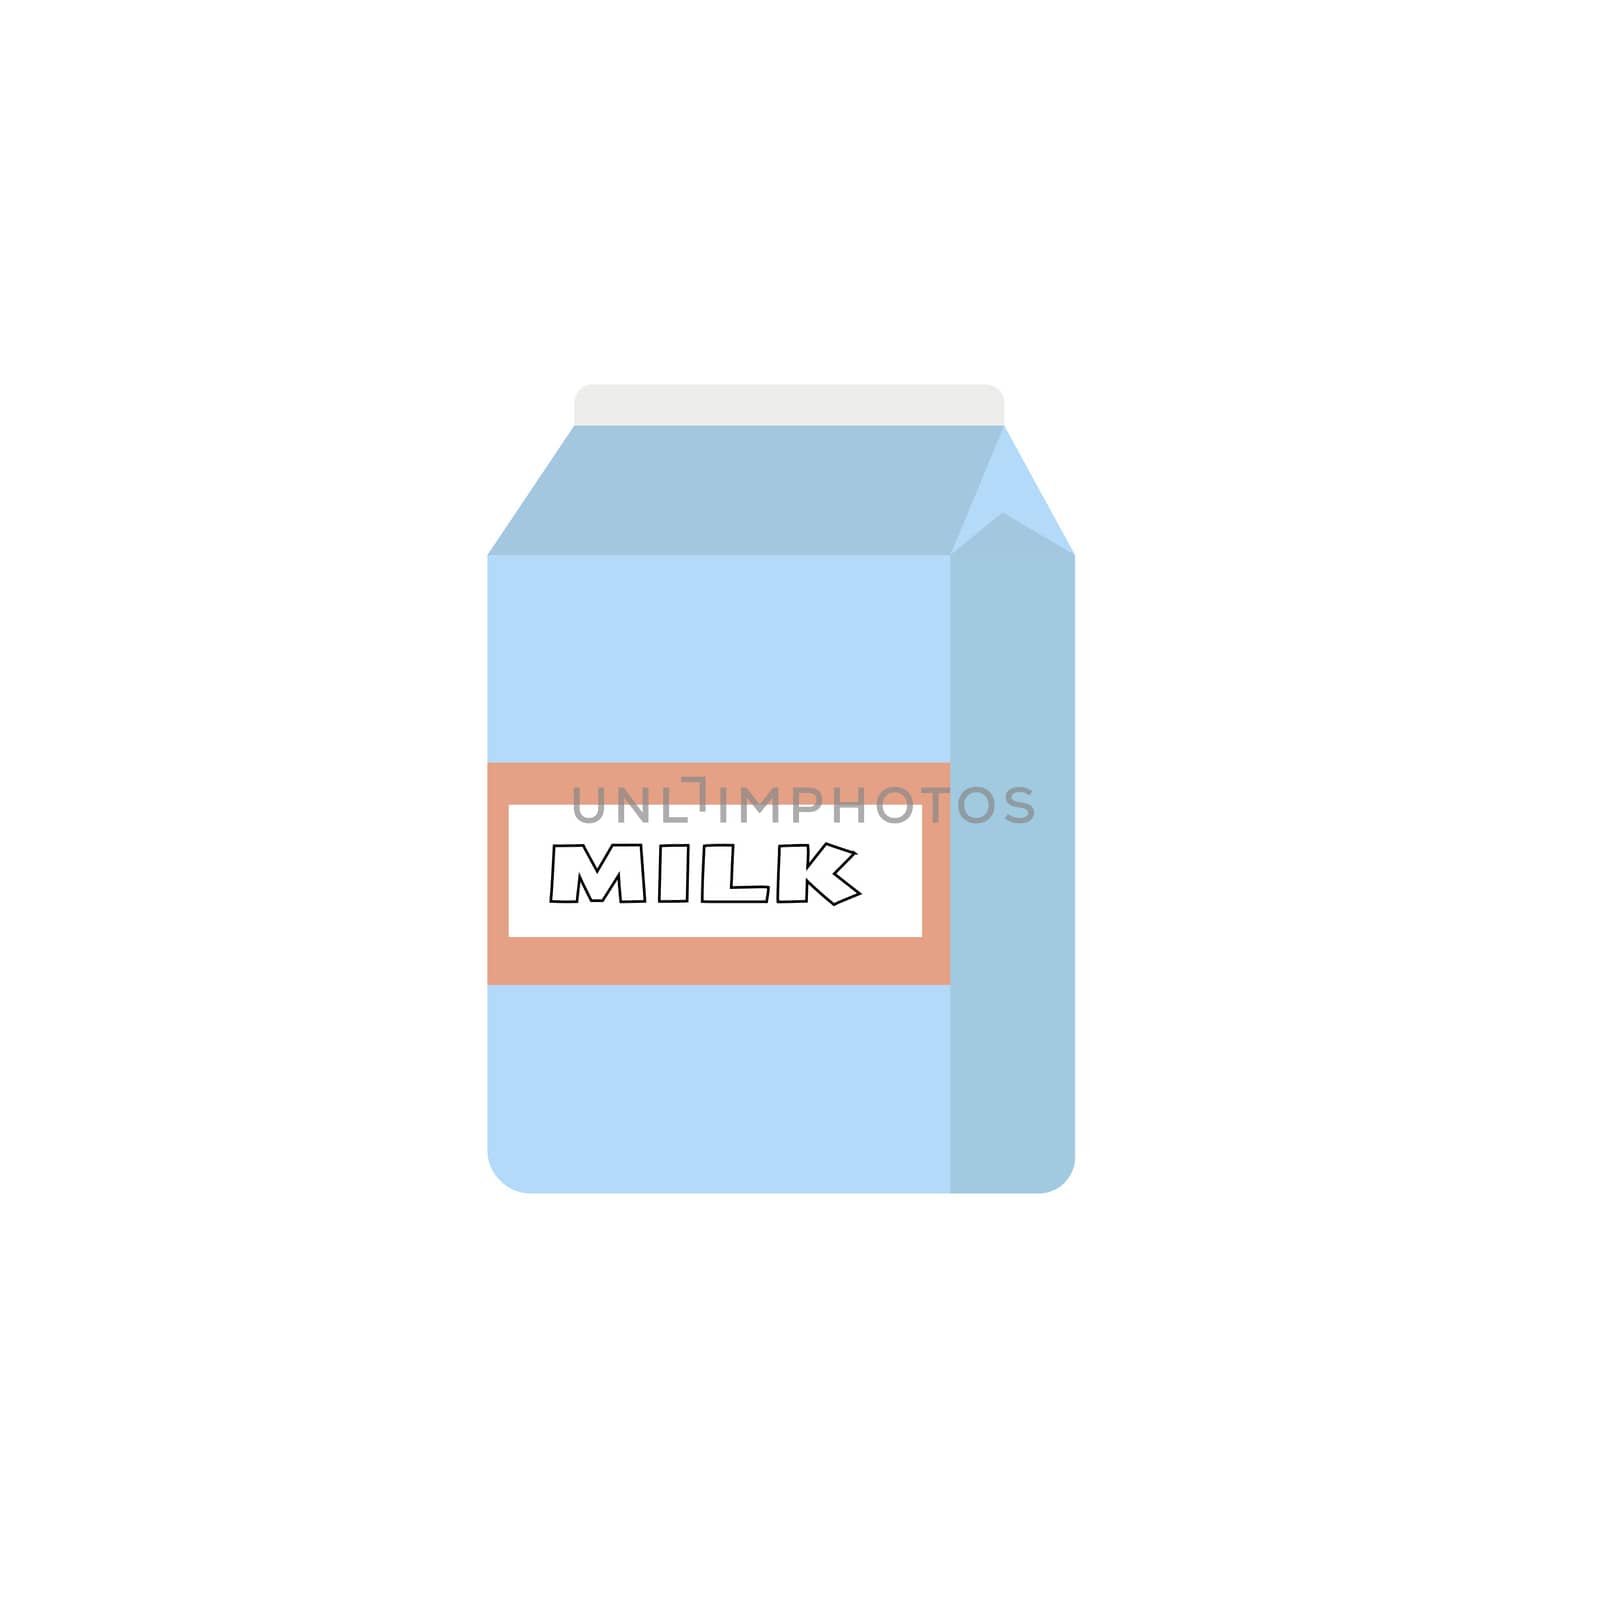 paper packet with milk isolated on white. illustration in flat style.